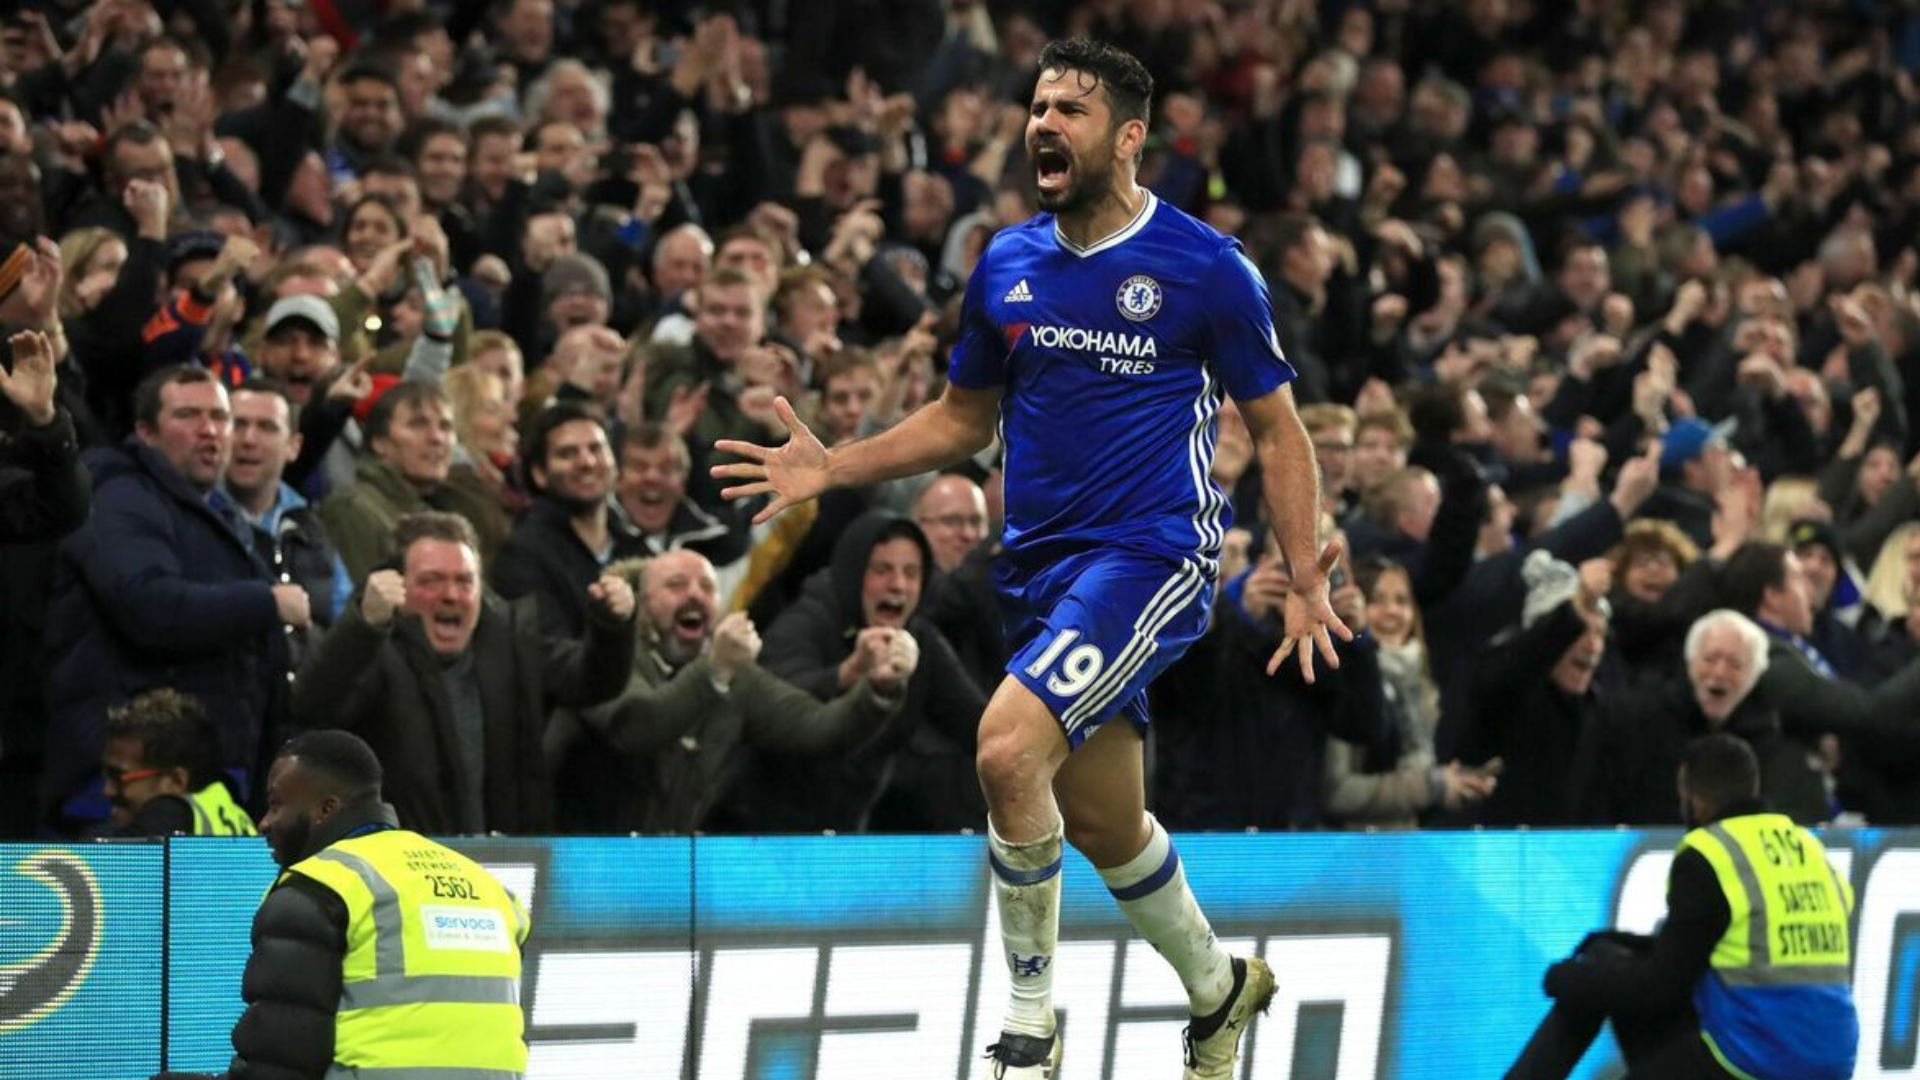 Diego costa shouting while running with a big crowd around him